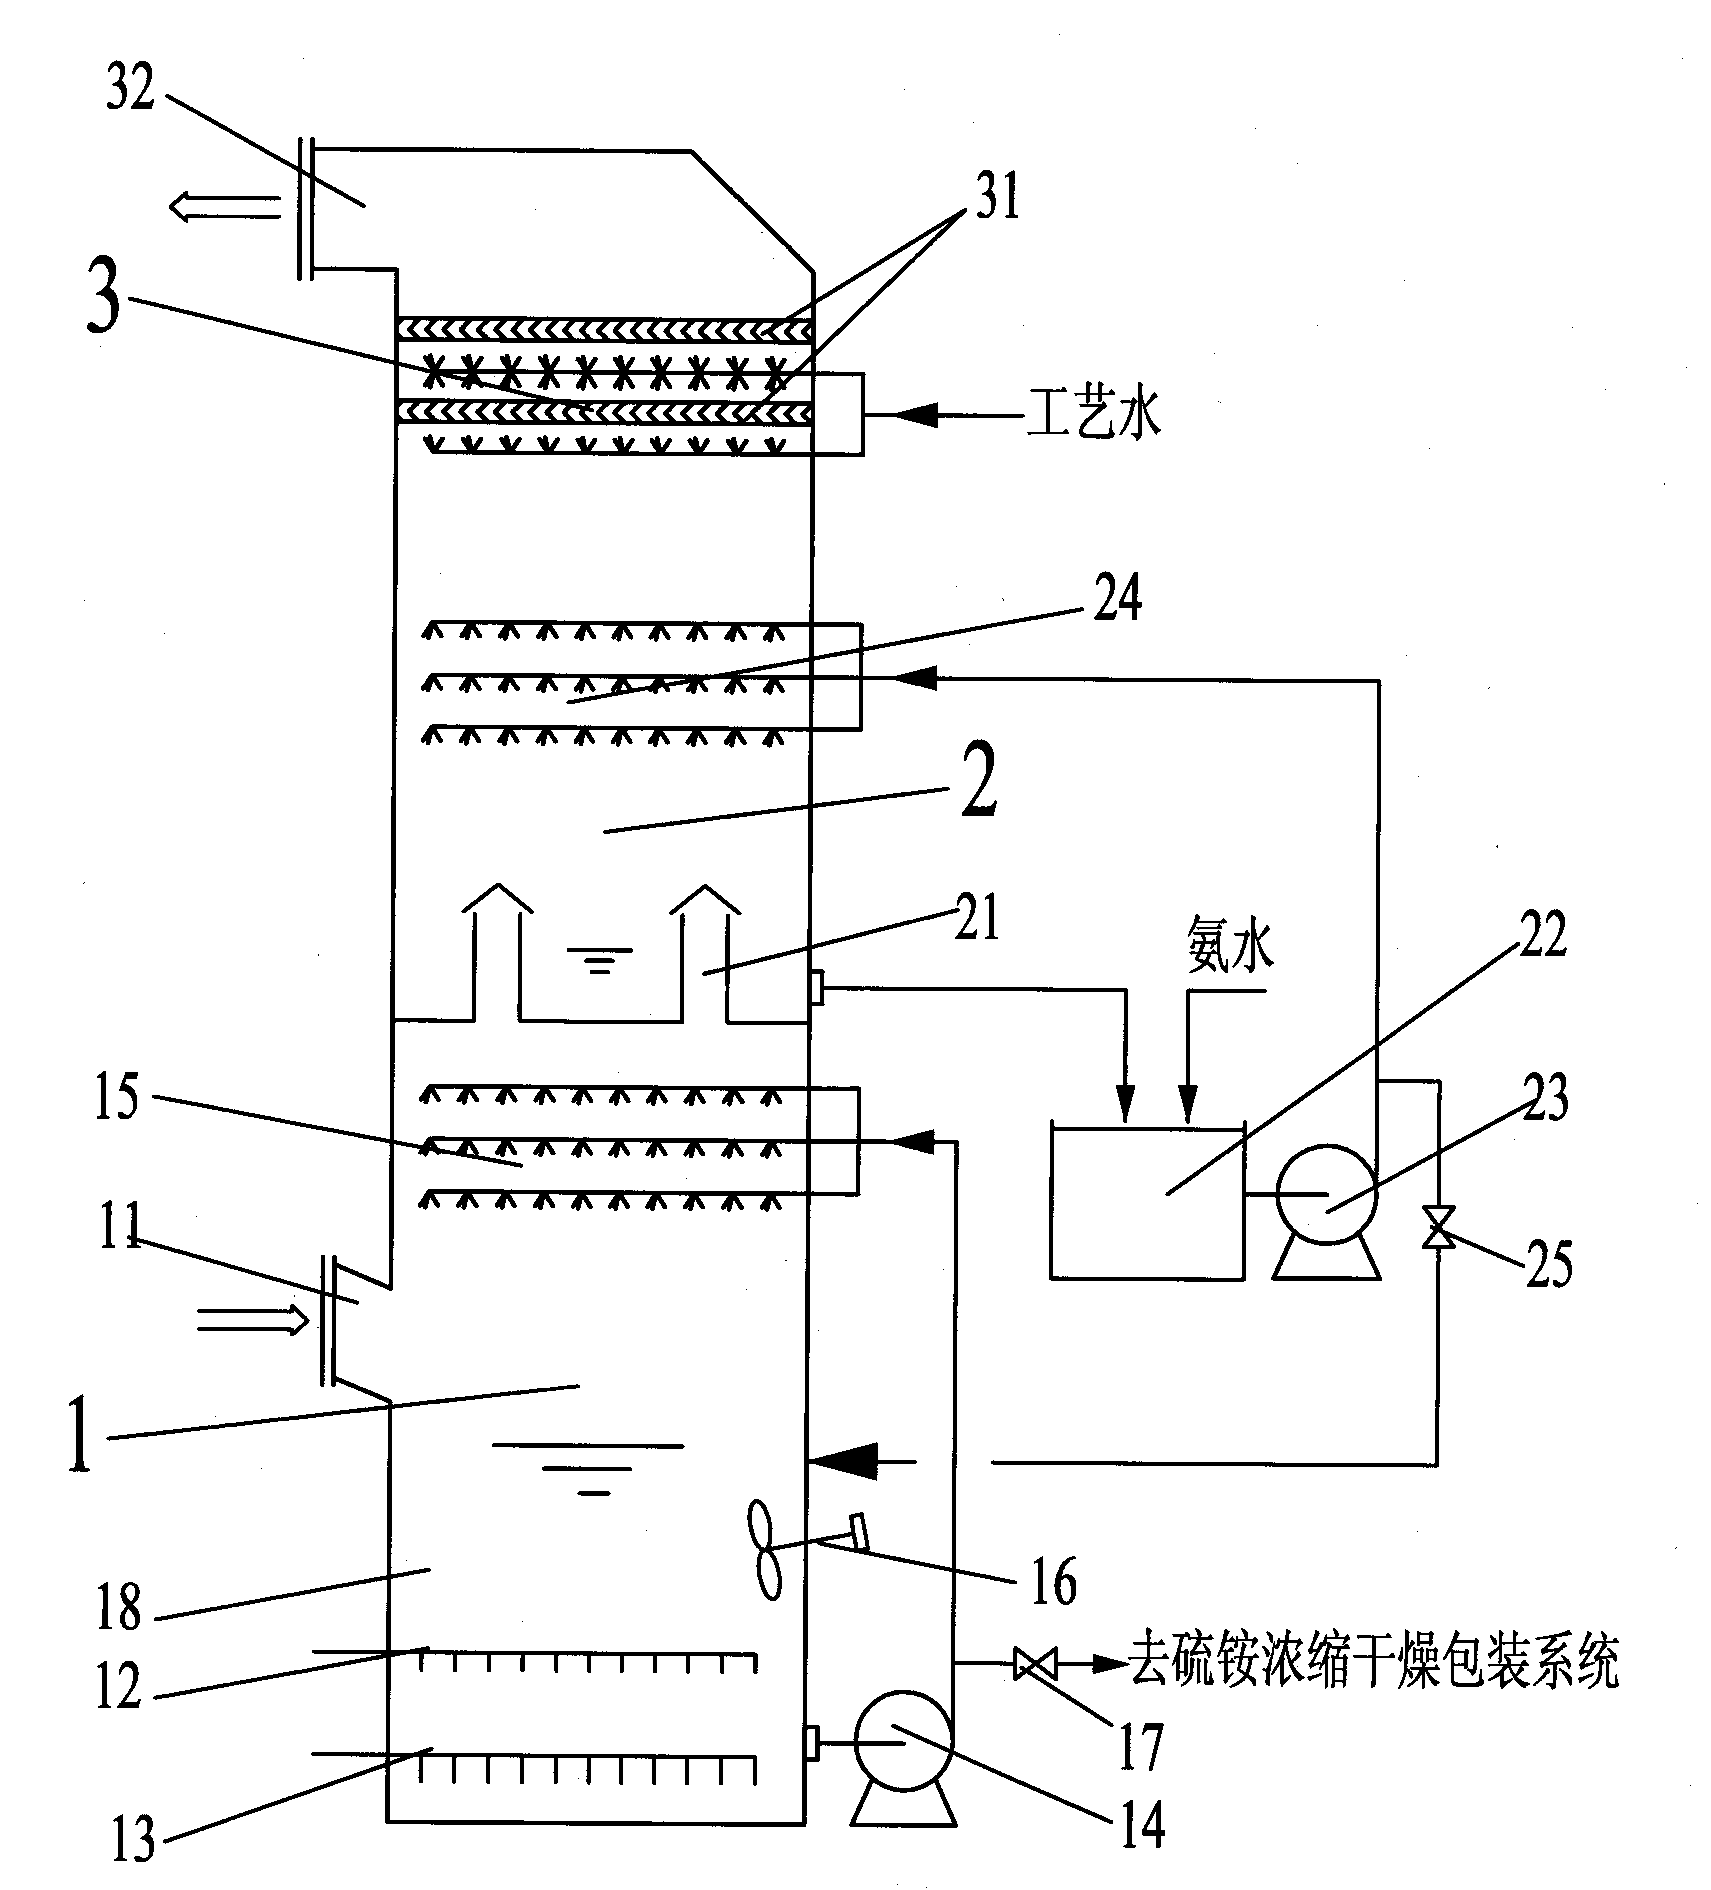 Method and system for improving quality of desulfuration byproduct ammonium sulfate